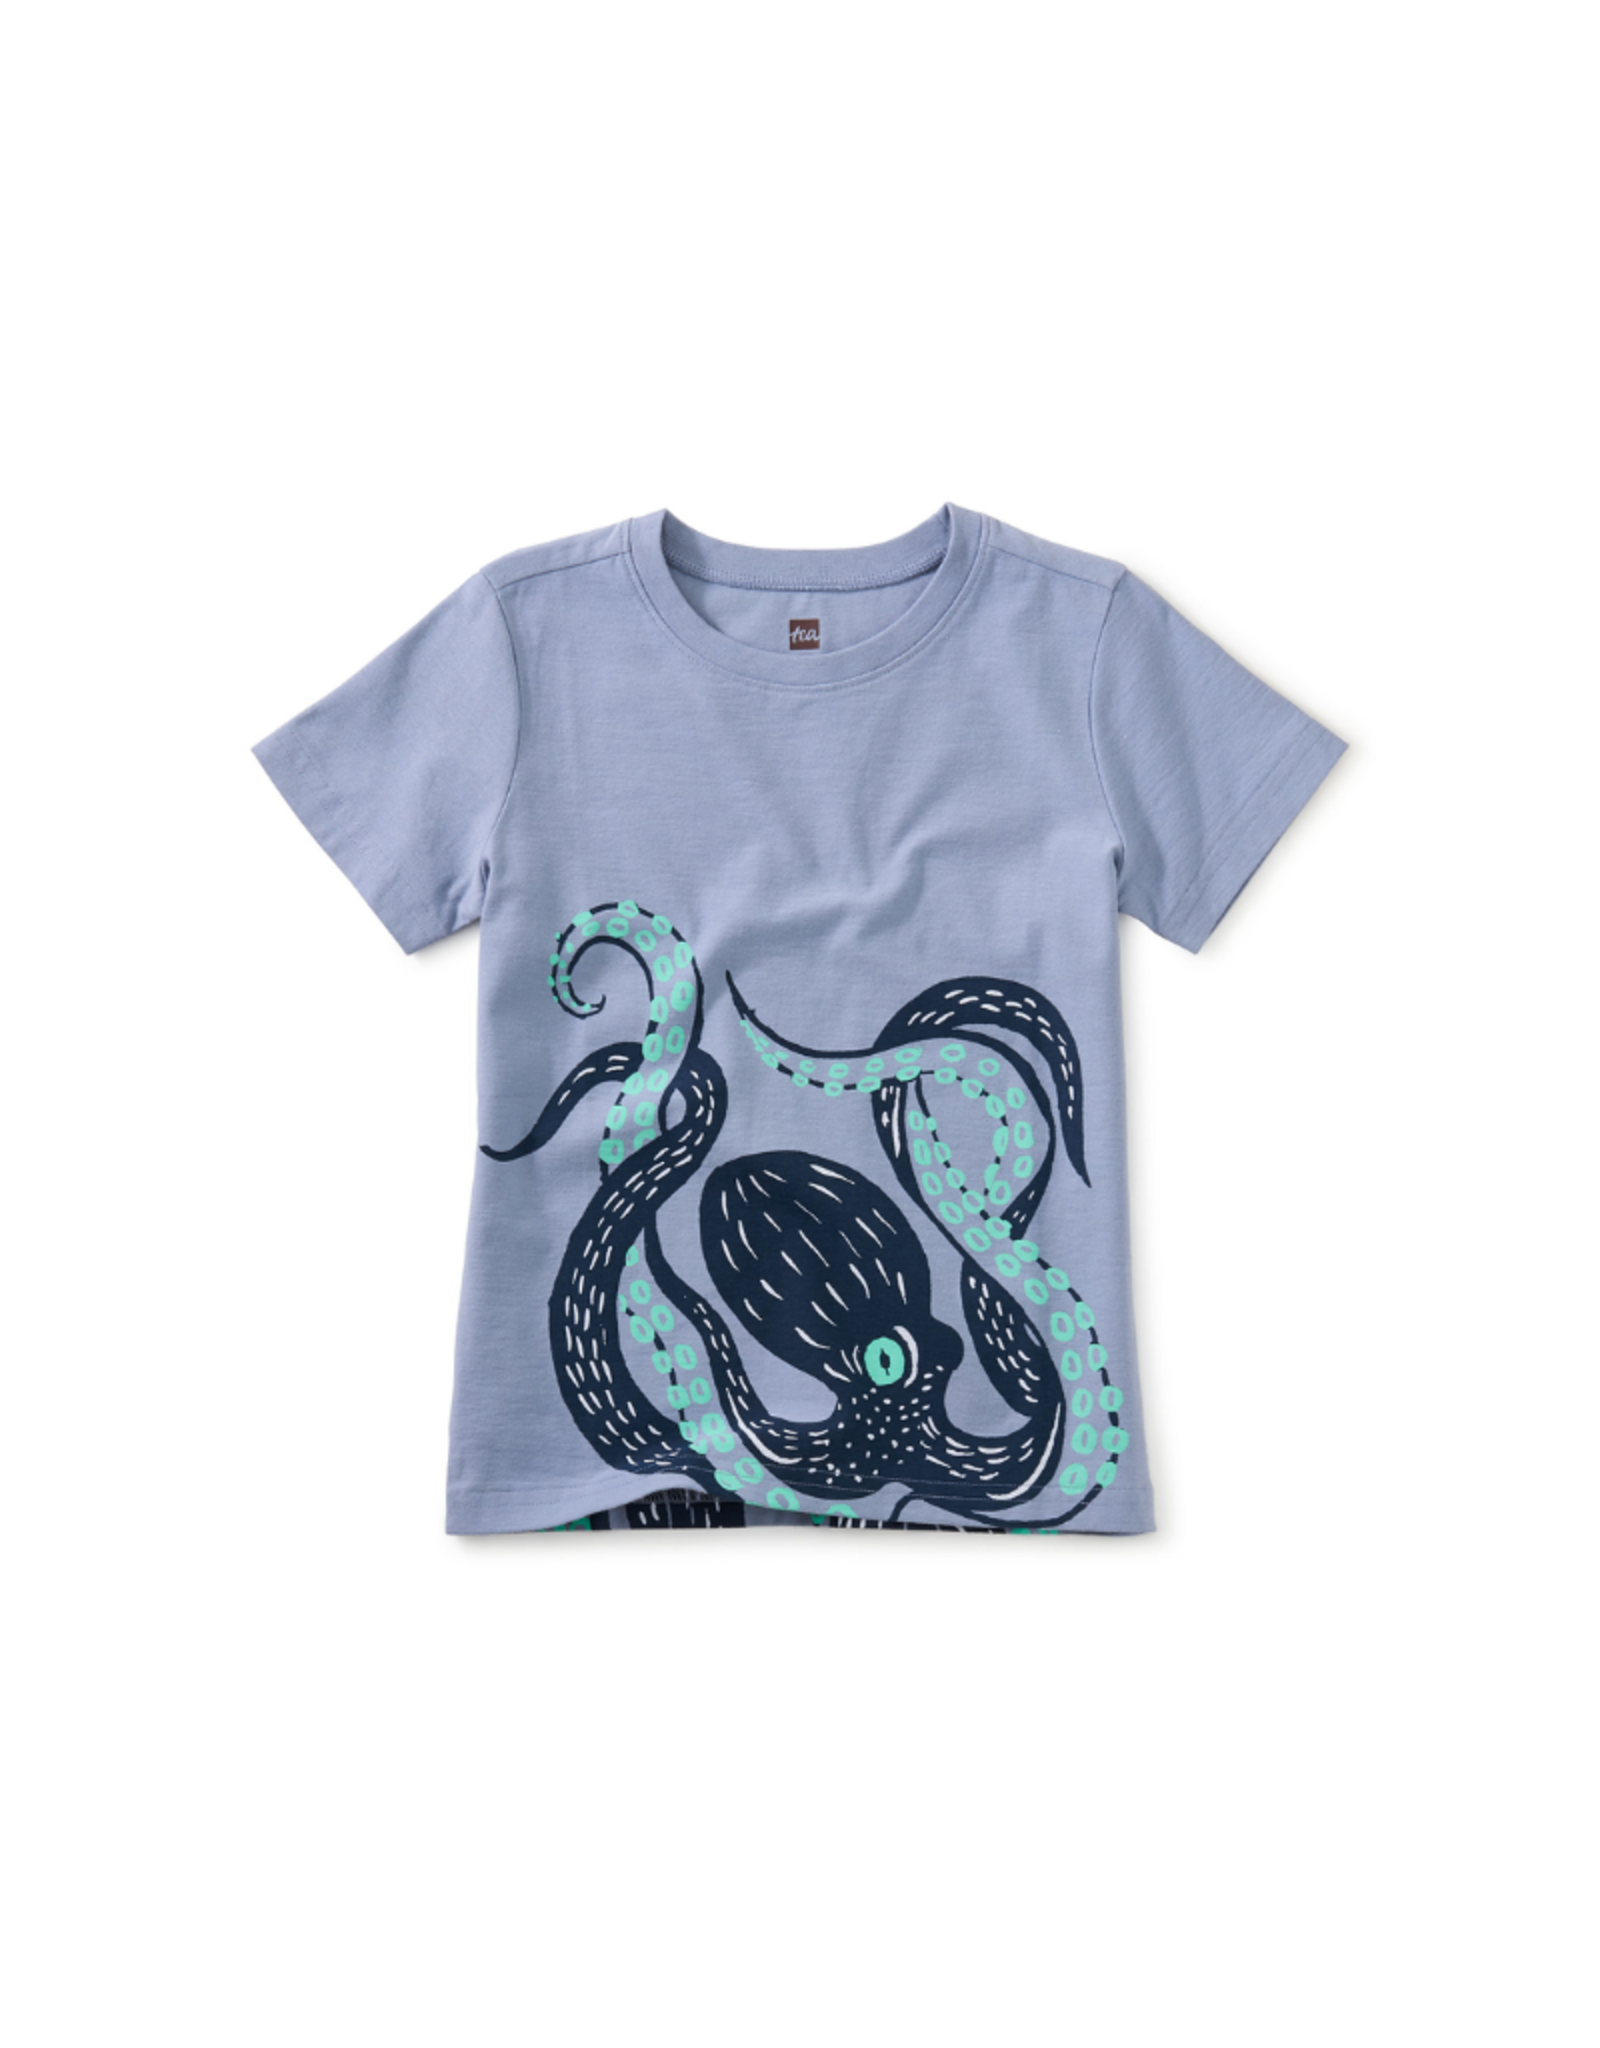 Awesome Octo Double-Sided Tee